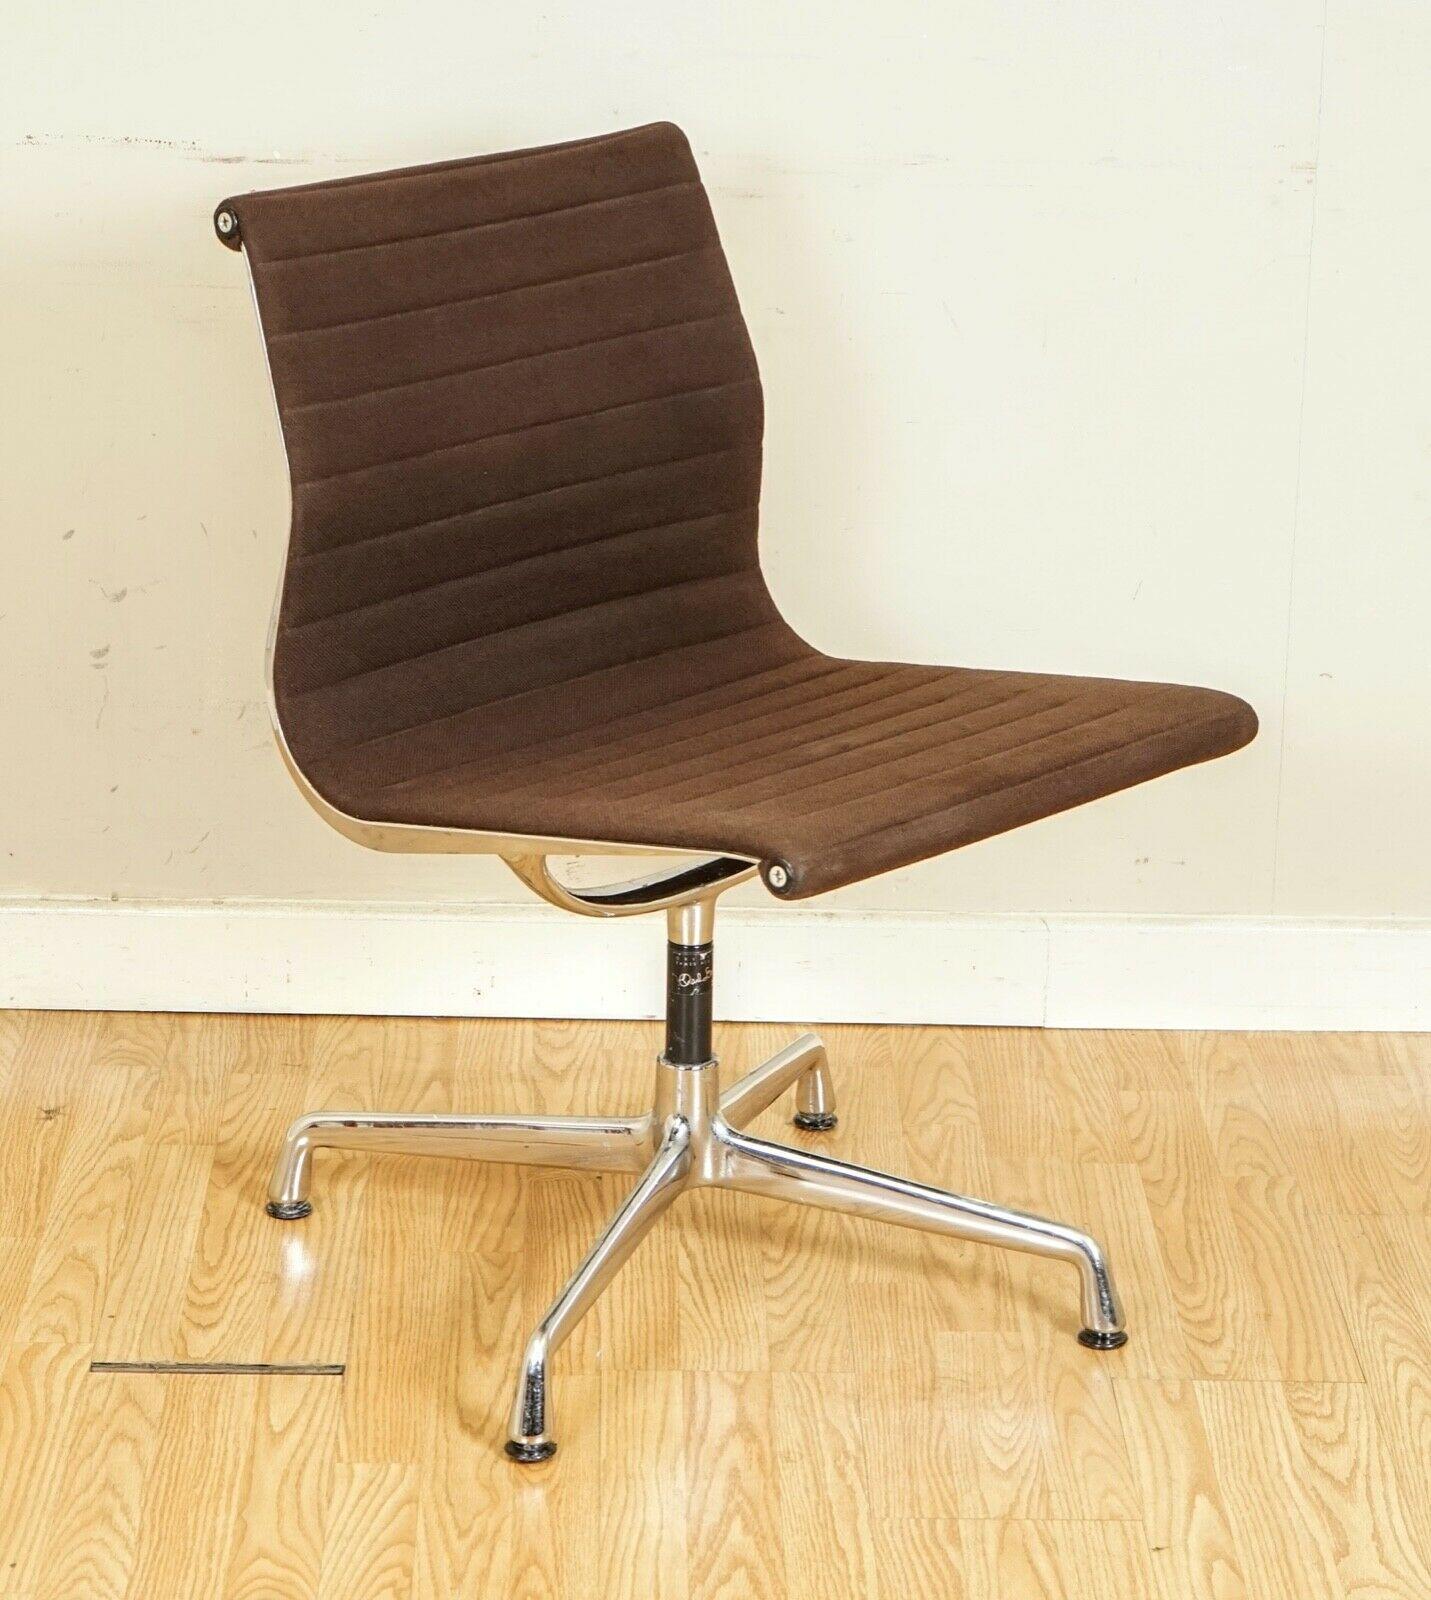 We are delighted to offer for sale this vintage Charles Eames Aluminium Swivel chair.

The Eames are best known for their groundbreaking contributions to architecture, furniture design, and industrial design etc.

We have lightly restored this